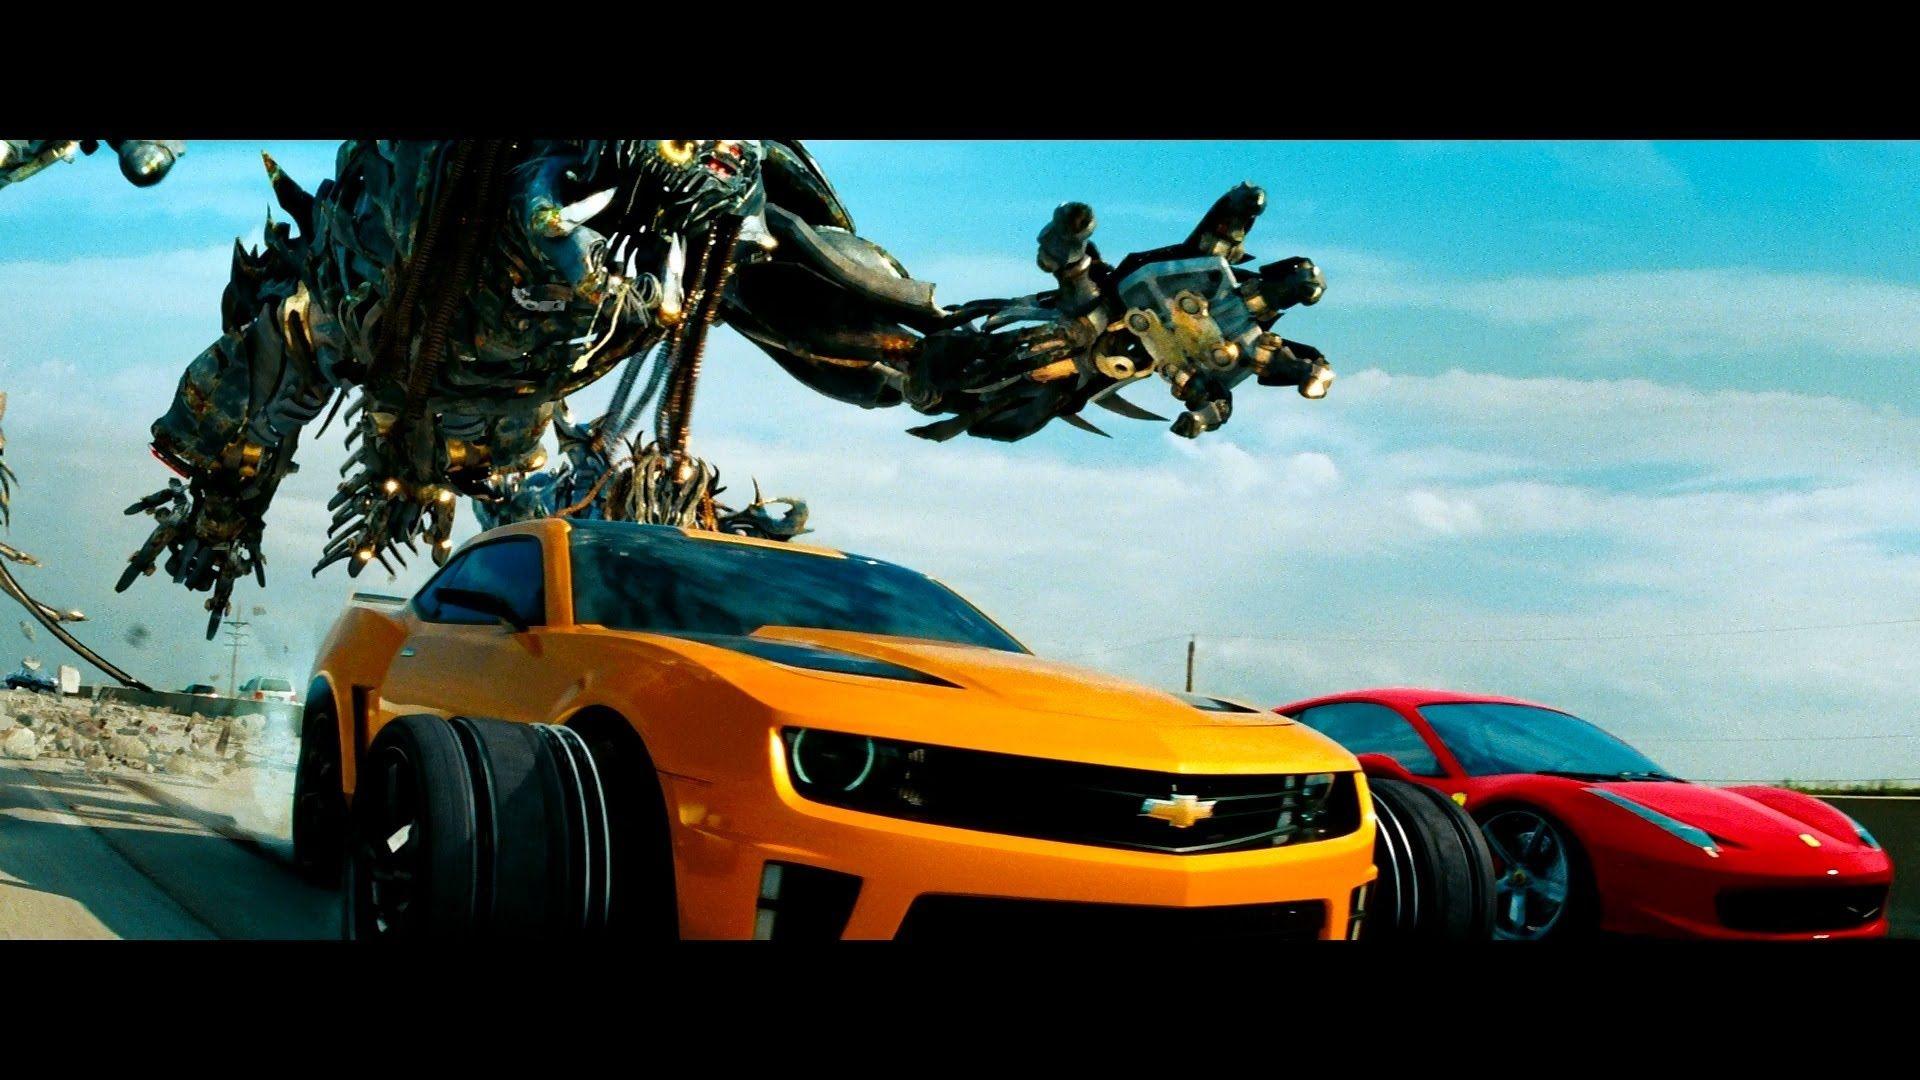 Transformers, Dark of the Moon Fight Scene Highway Chase 1080HD VO